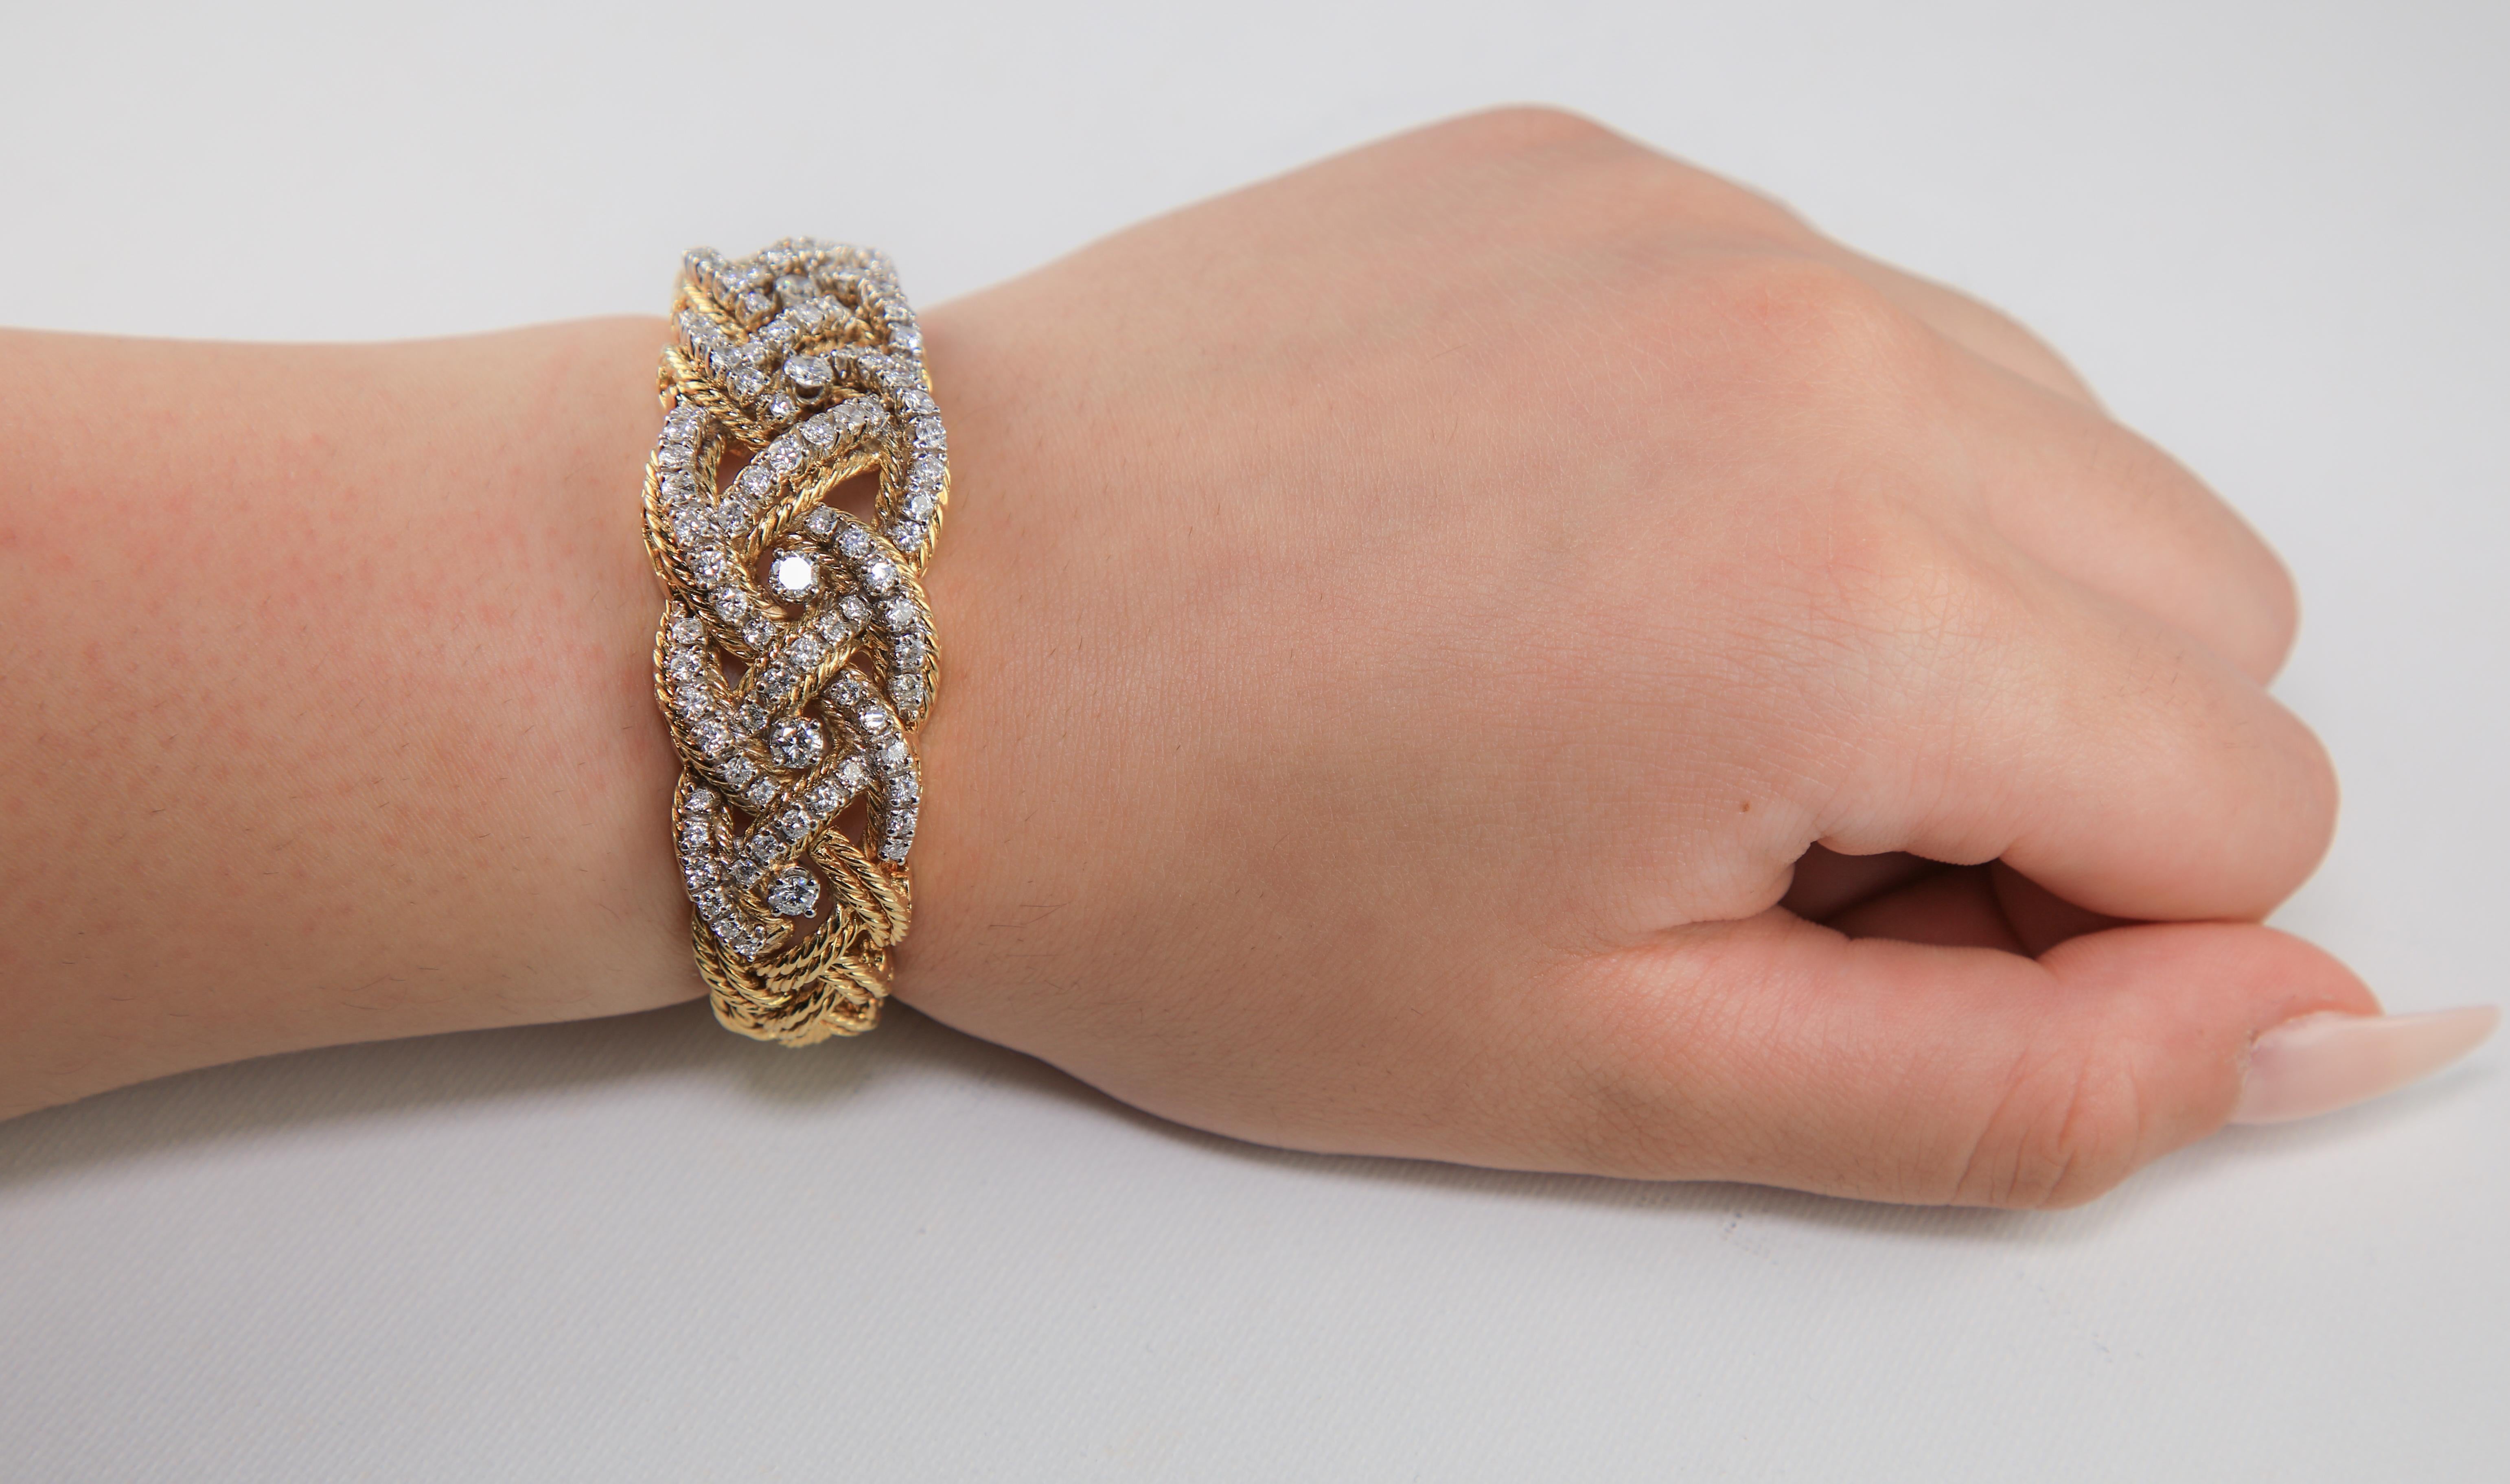 Solid 1960s 18 Karat Gold Diamond 4.50 Carat Bracelet
Created by Italian Artisans Circa-1960s , New York, this stunning 18k bracelet pulls together the era with it’s beautiful charm and class, the finest craftsmanship was put to use ensuring the